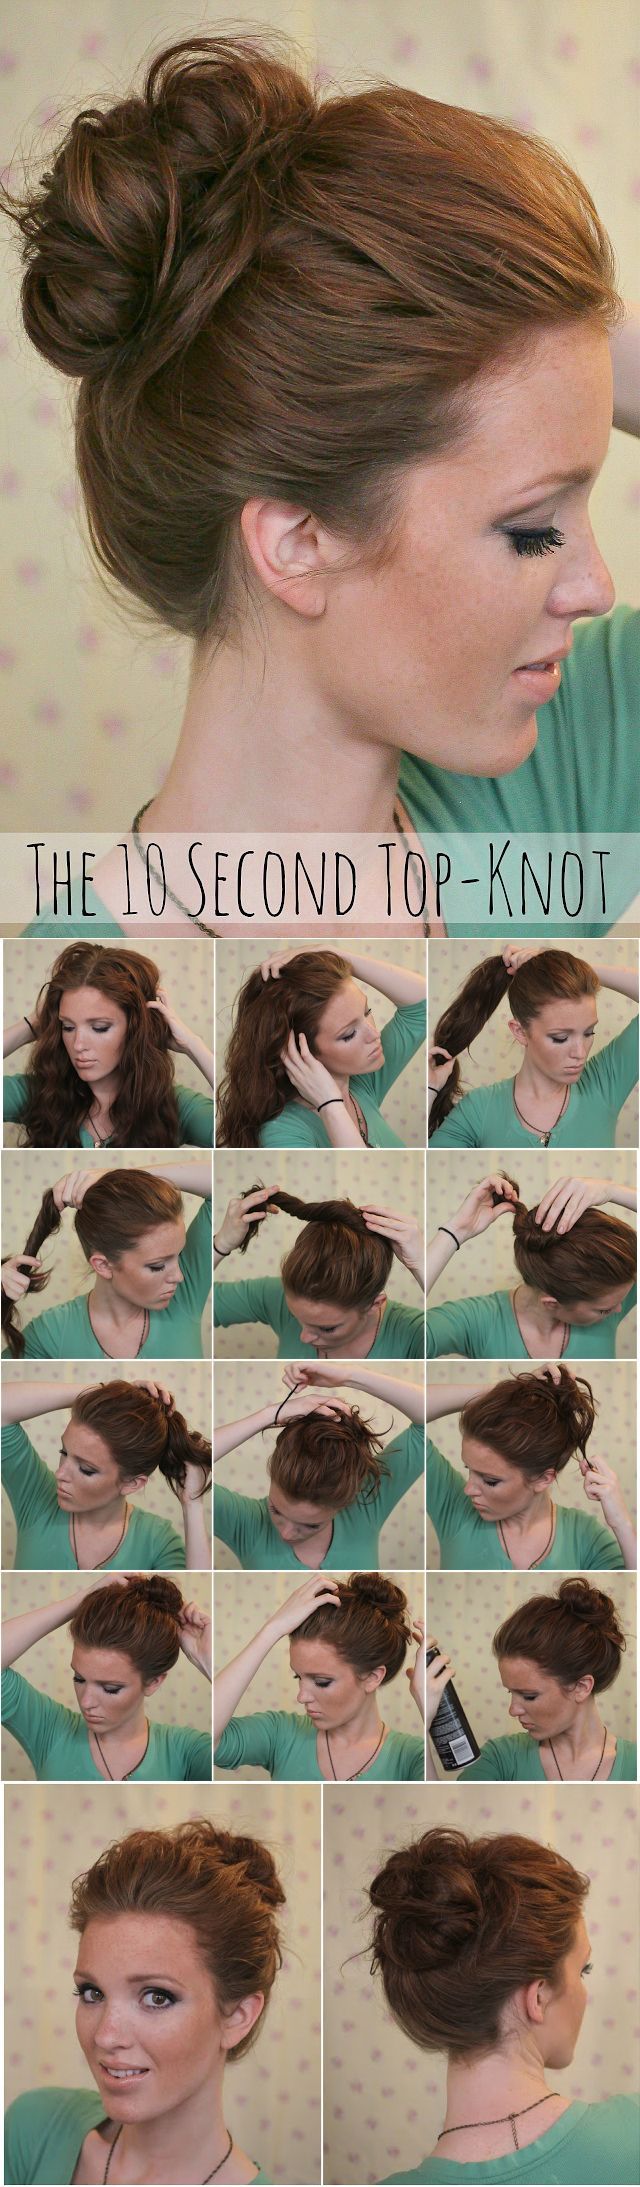 Super Easy Knotted Bun Updo and Simple Bun Hairstyle Tutorials, she makes it look so simple